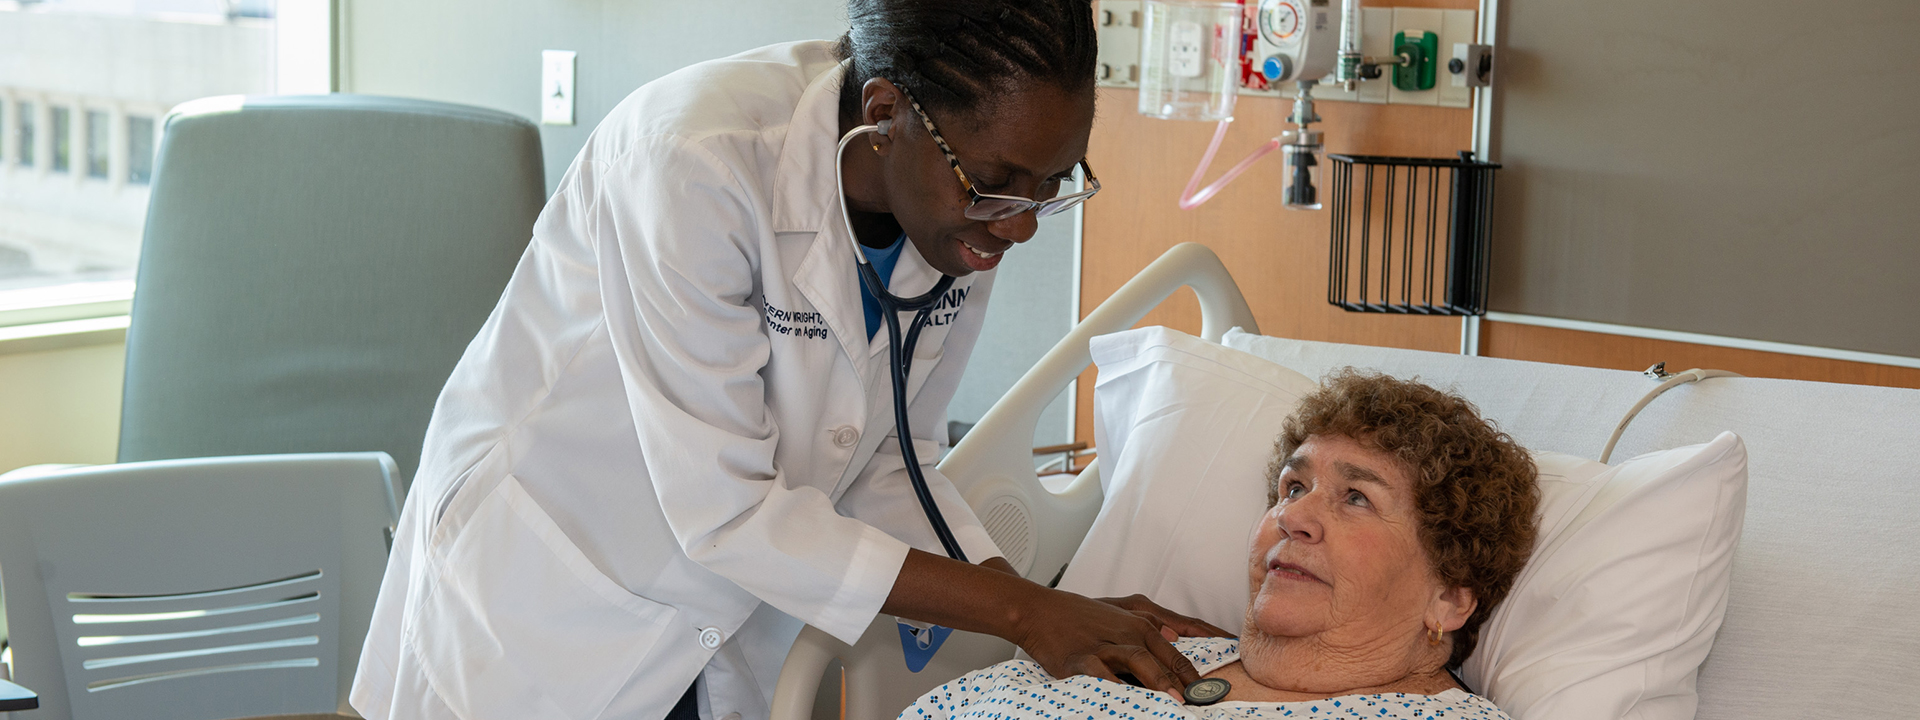 Lavern Wright, M.D., examining a patient laying in a hospital bed